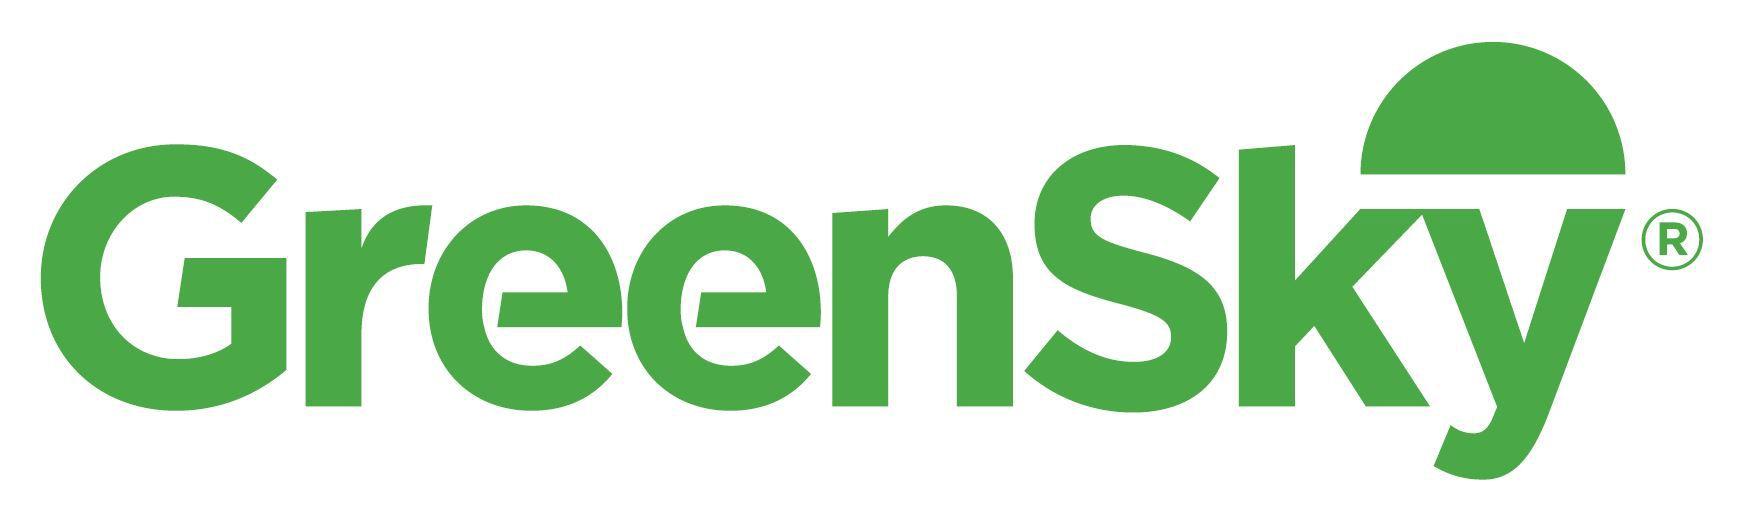 Green Payment Business Logo - American Express and GreenSky Team Up to Fuel Business Growth ...